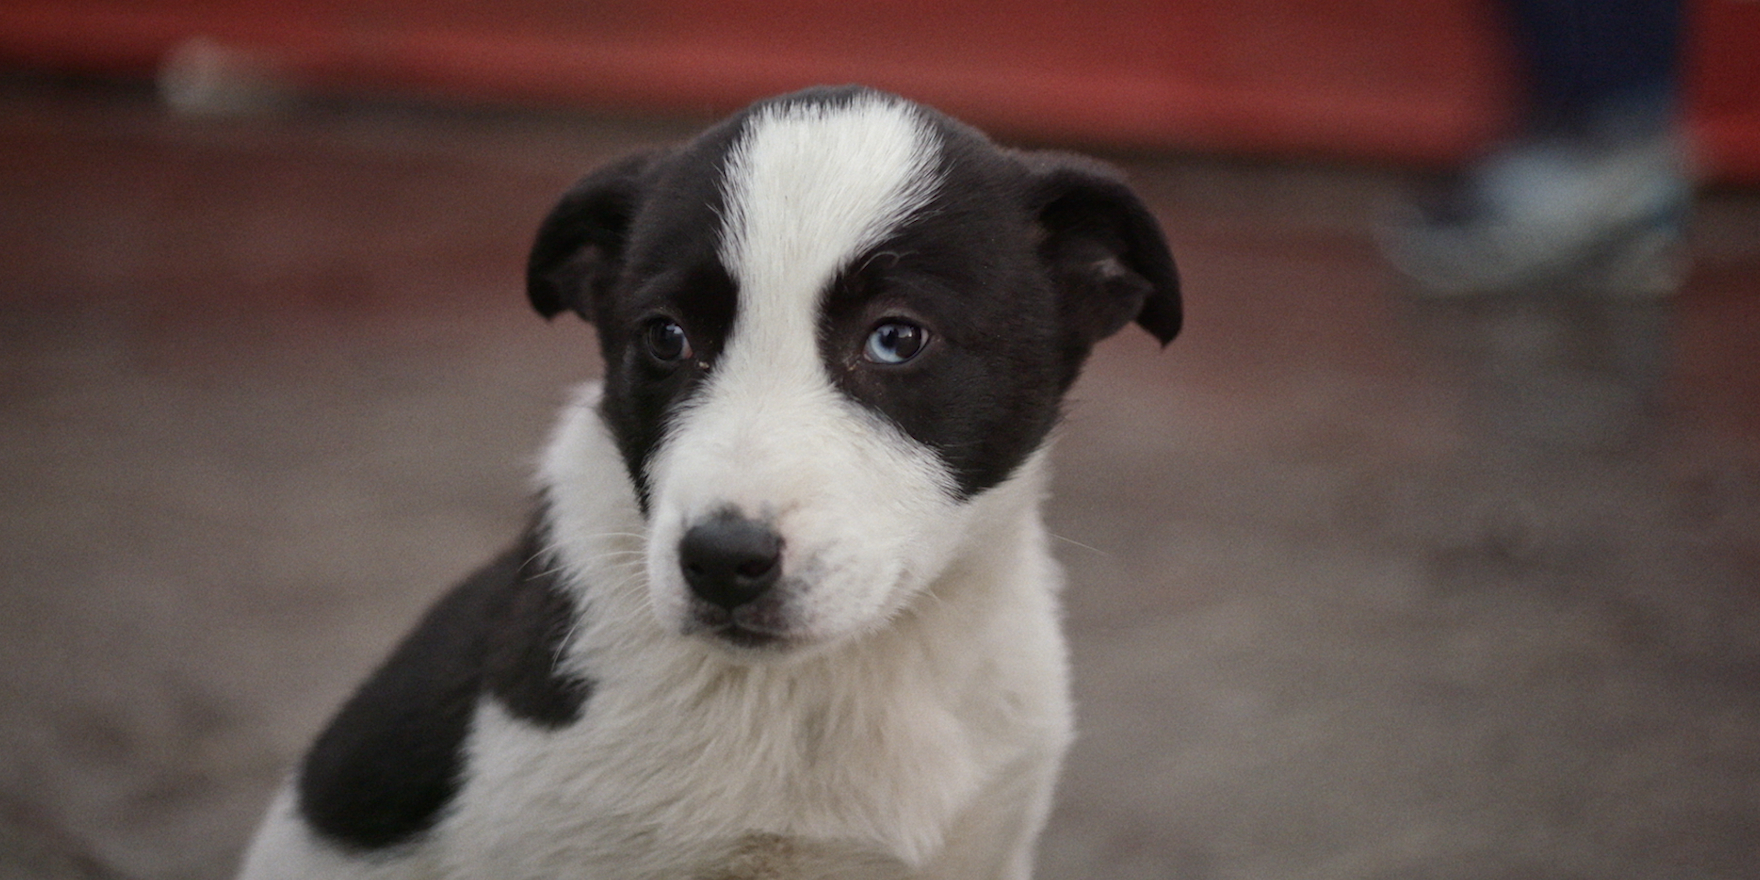 The Puppy with the One Blue Eye: A Documentary Filmmaker's Dilemma